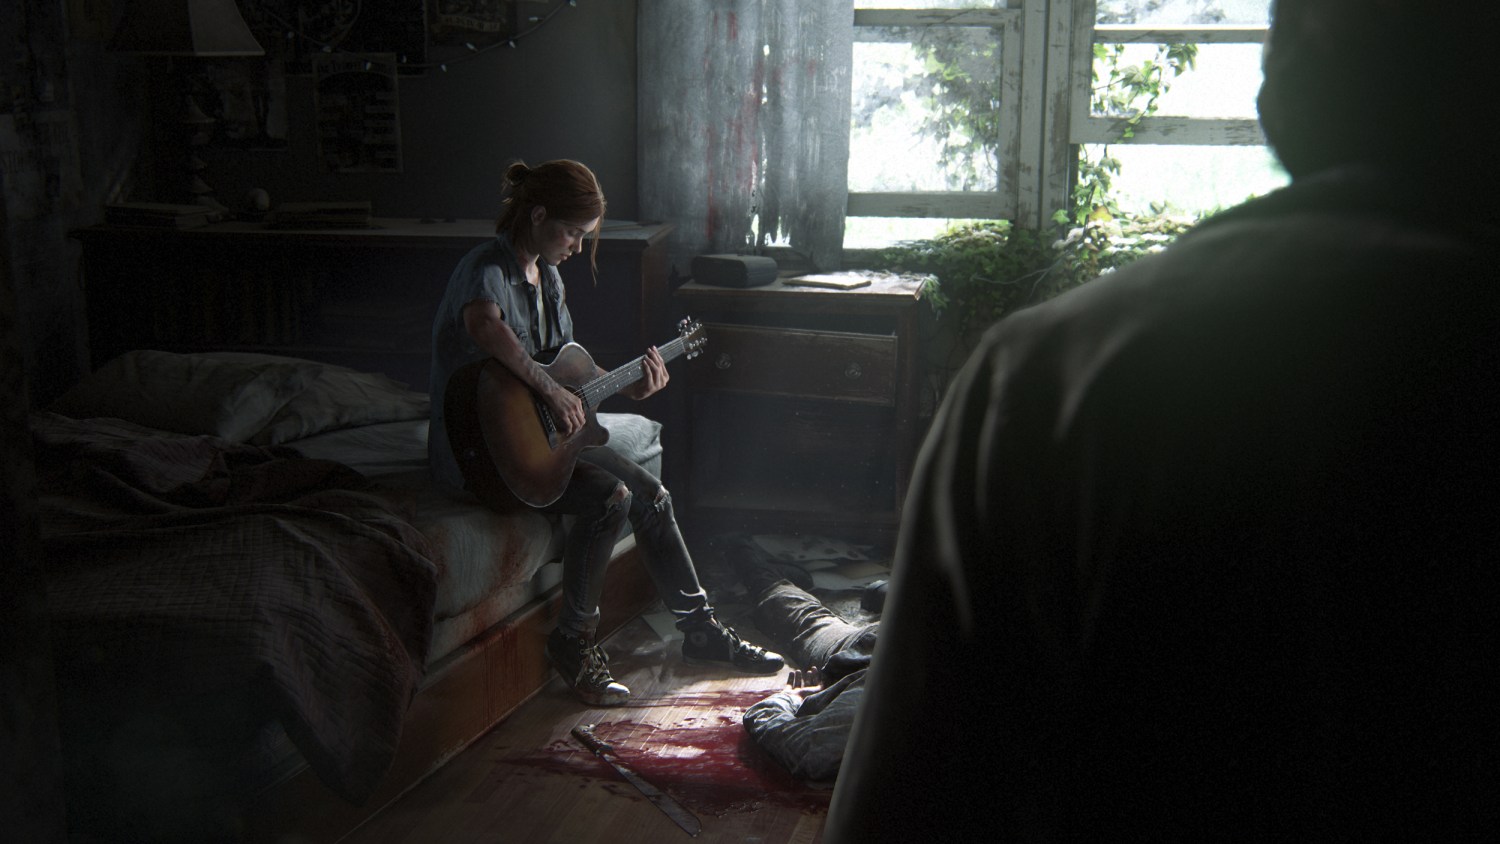 The Last of Us: Processing Grief (Joel)